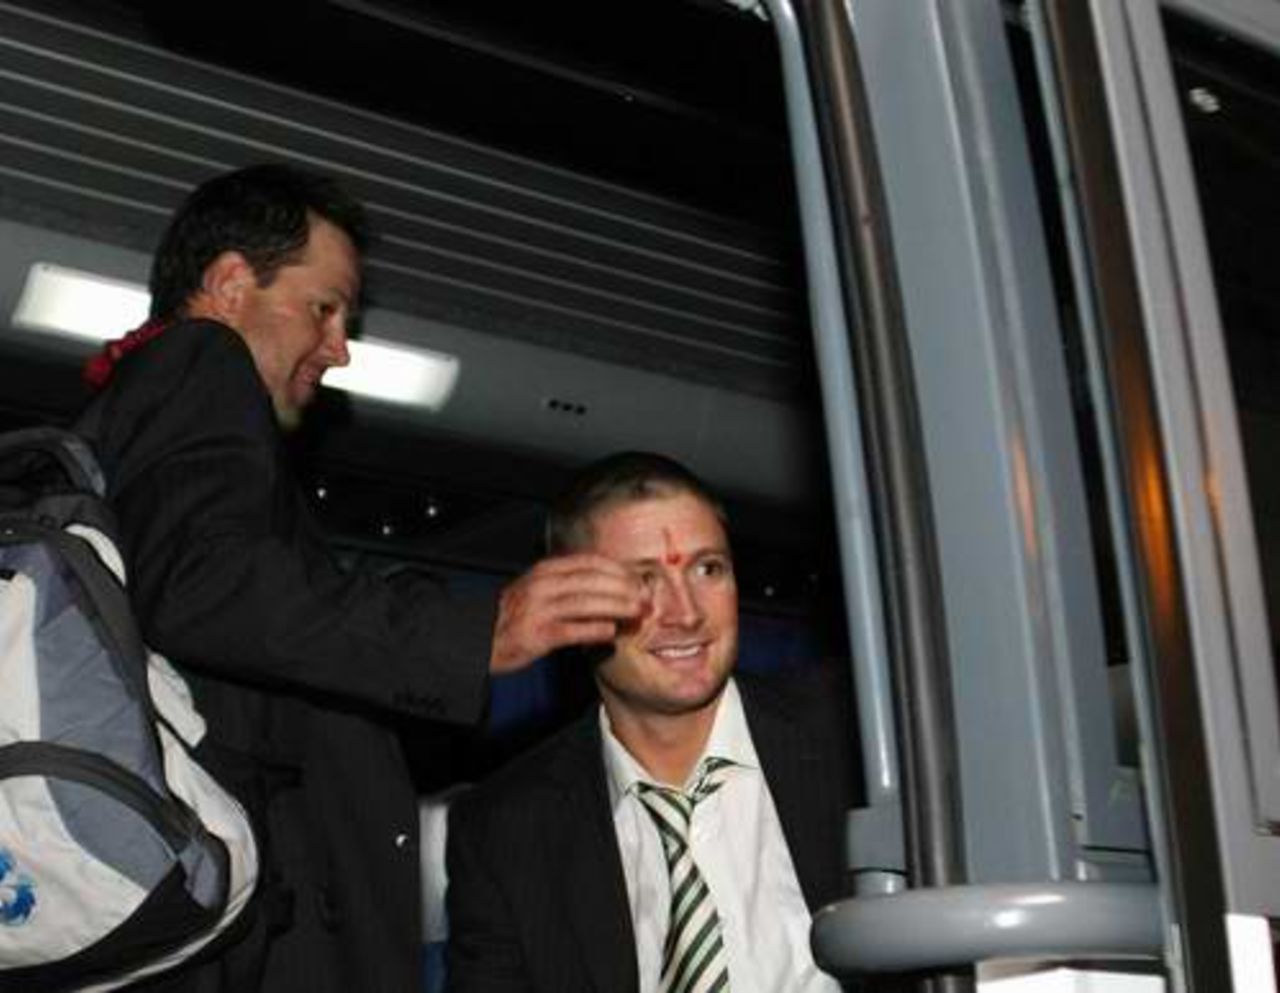 Ricky Ponting and Michael Clarke board the team bus at the airport in Jaipur